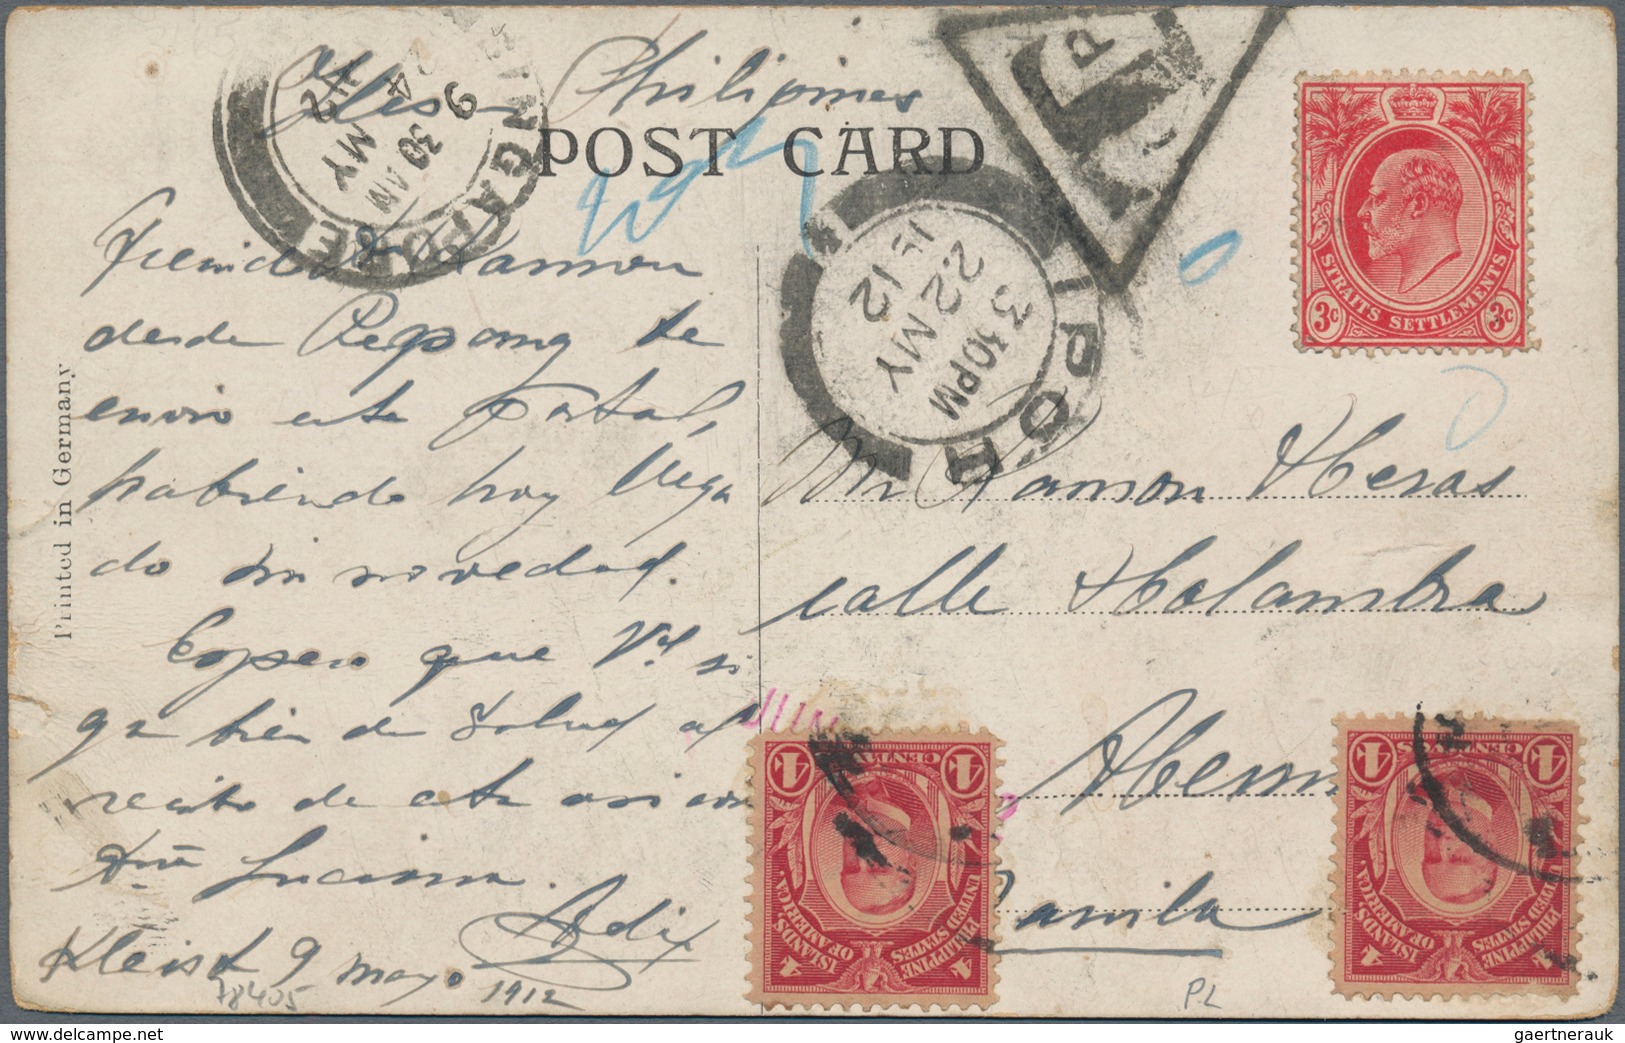 Malaiische Staaten - Straits Settlements: 1912, 3 C Red KEVII, Uncancelled, Invalid Usage As Single - Straits Settlements